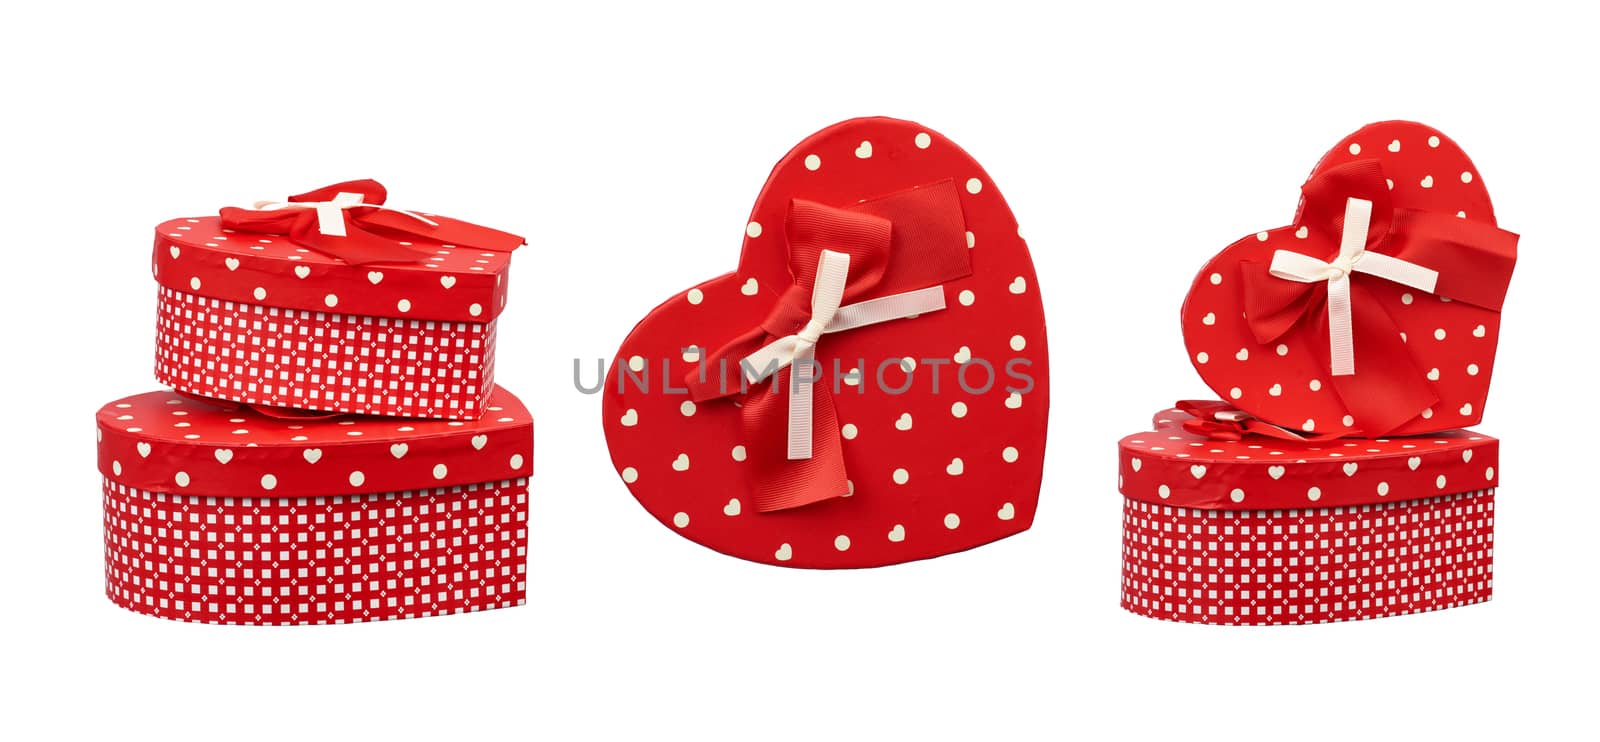 set of red heart-shaped cardboard boxes in white polka dots, gifts are isolated on a white background